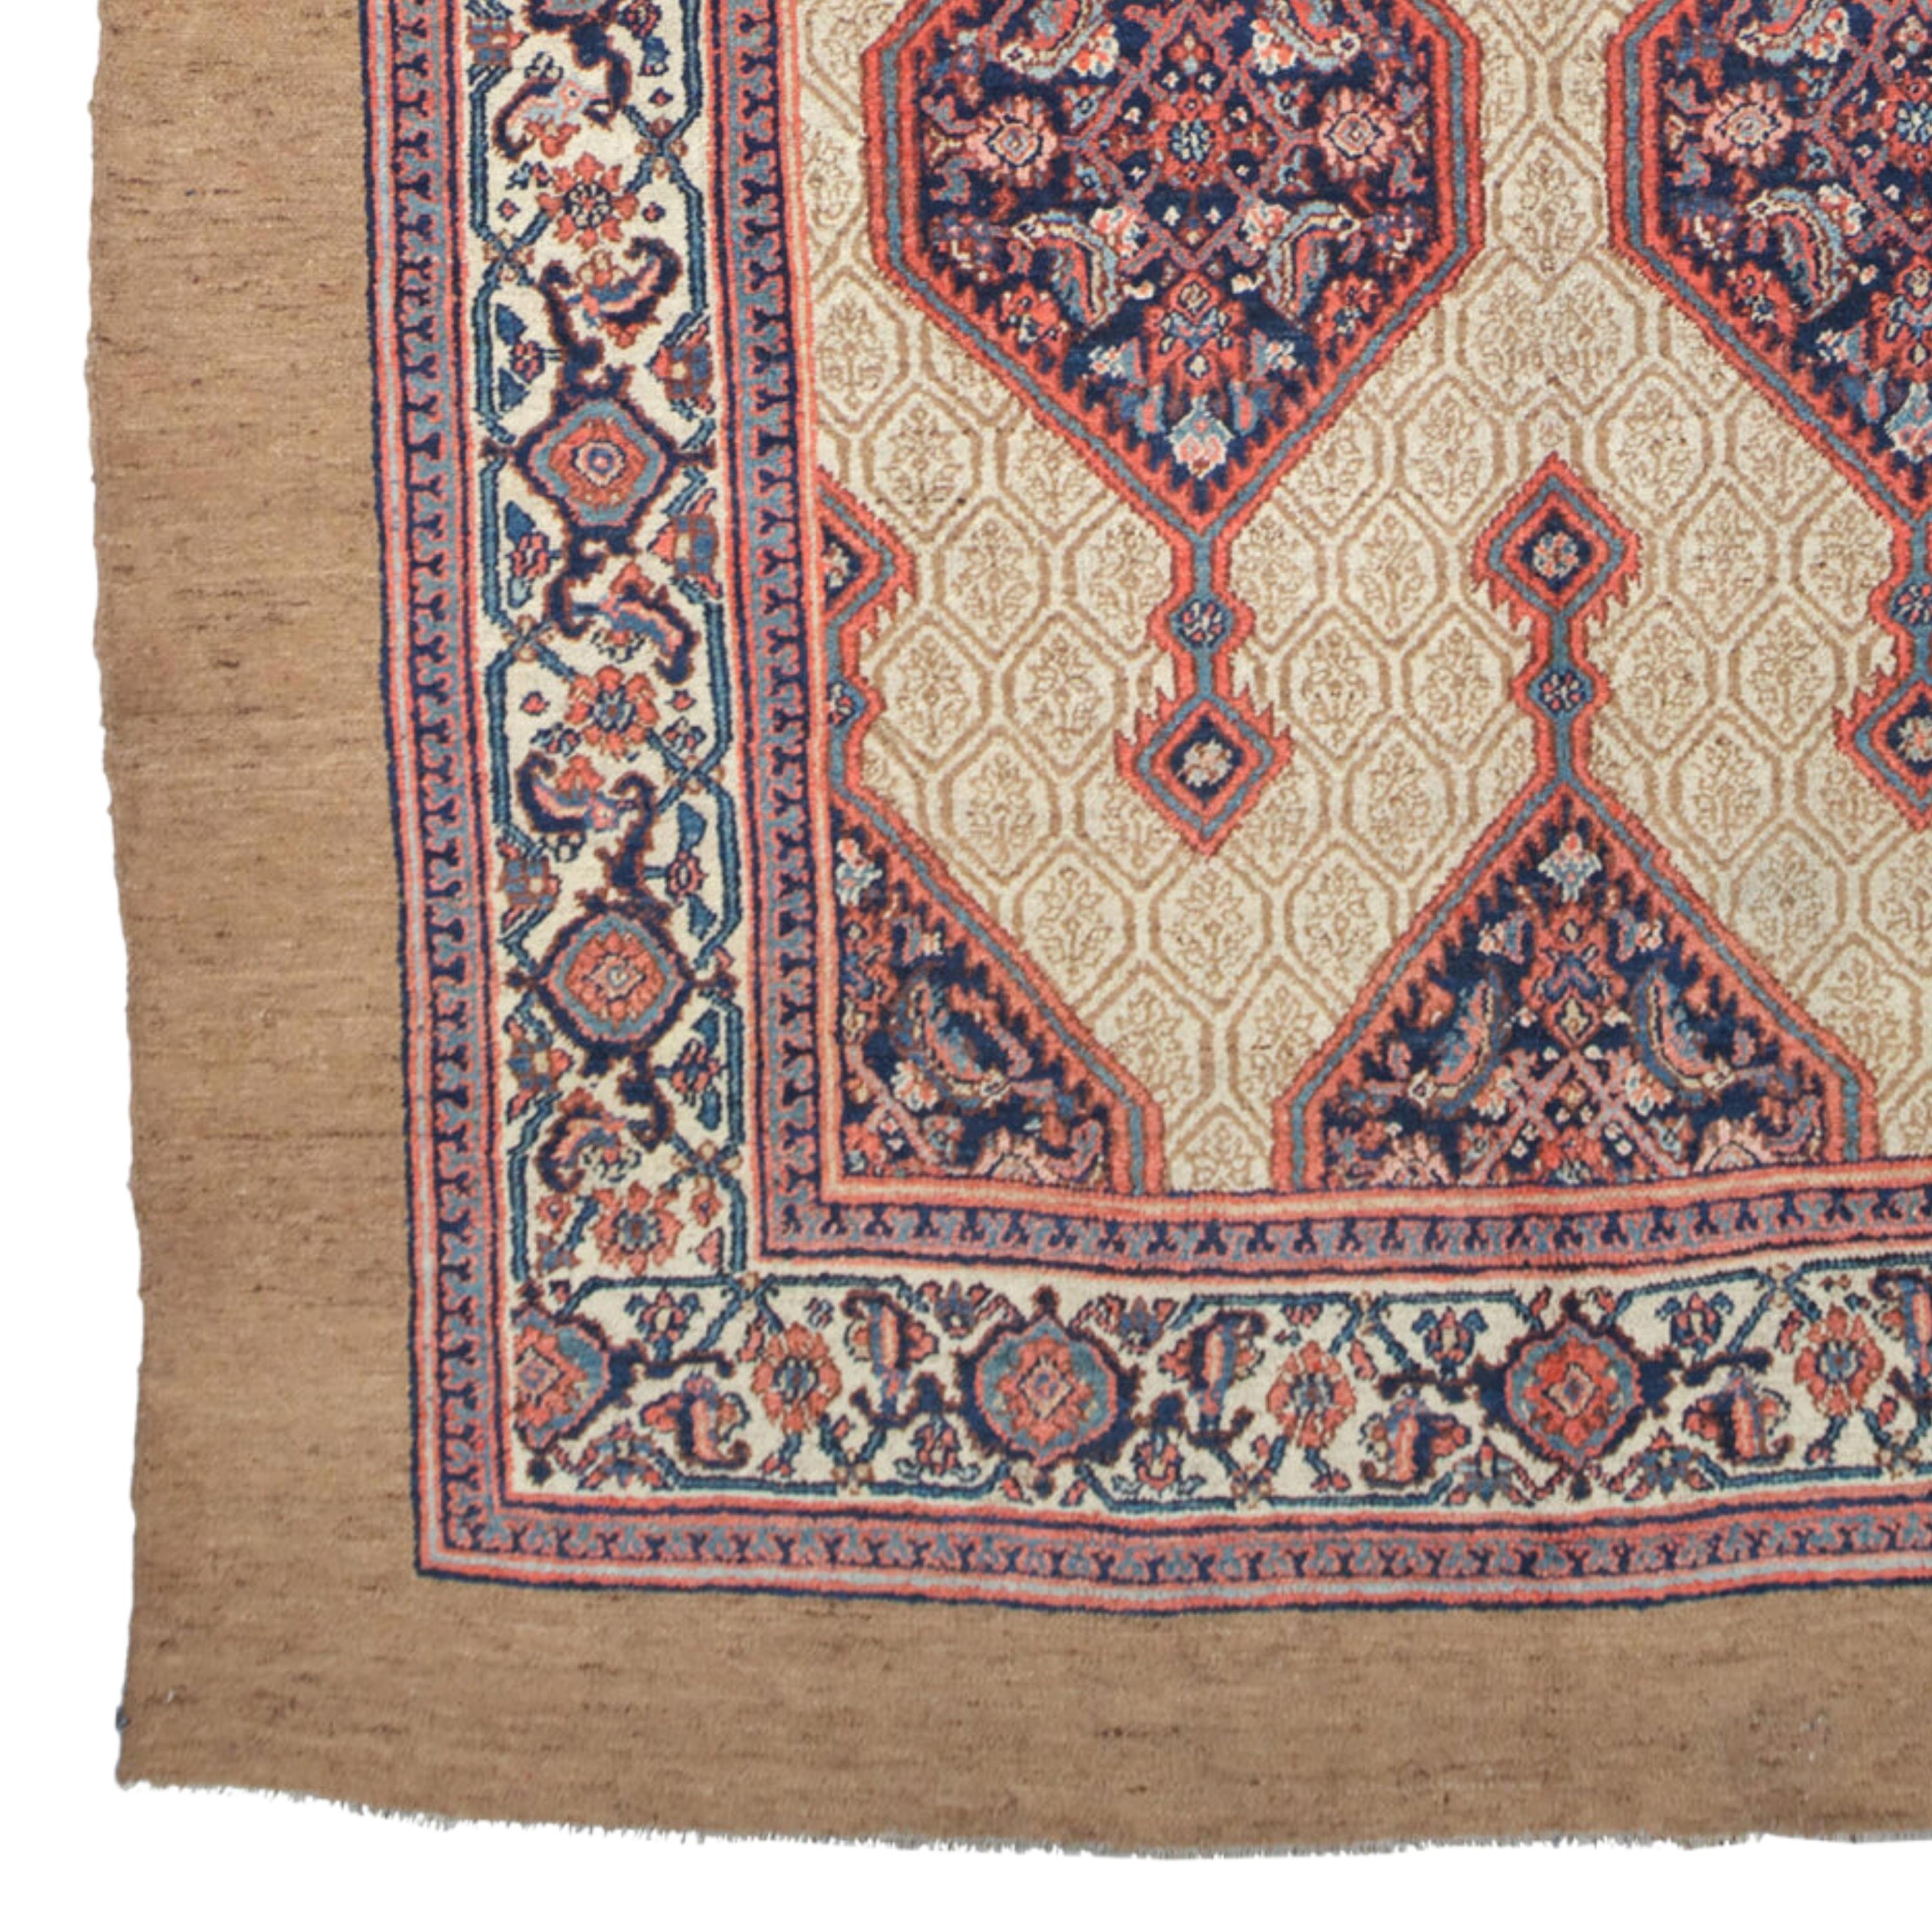 Sarab Camel Hair Rug - Antique Rug
19th Century Sarab Camel Hair Rug

A lovely example of a camel wool handwoven Serab runner. The openness of the piece woven circa 1890’s lends itself to so many different styles and locations.

Size : 208×370 cm